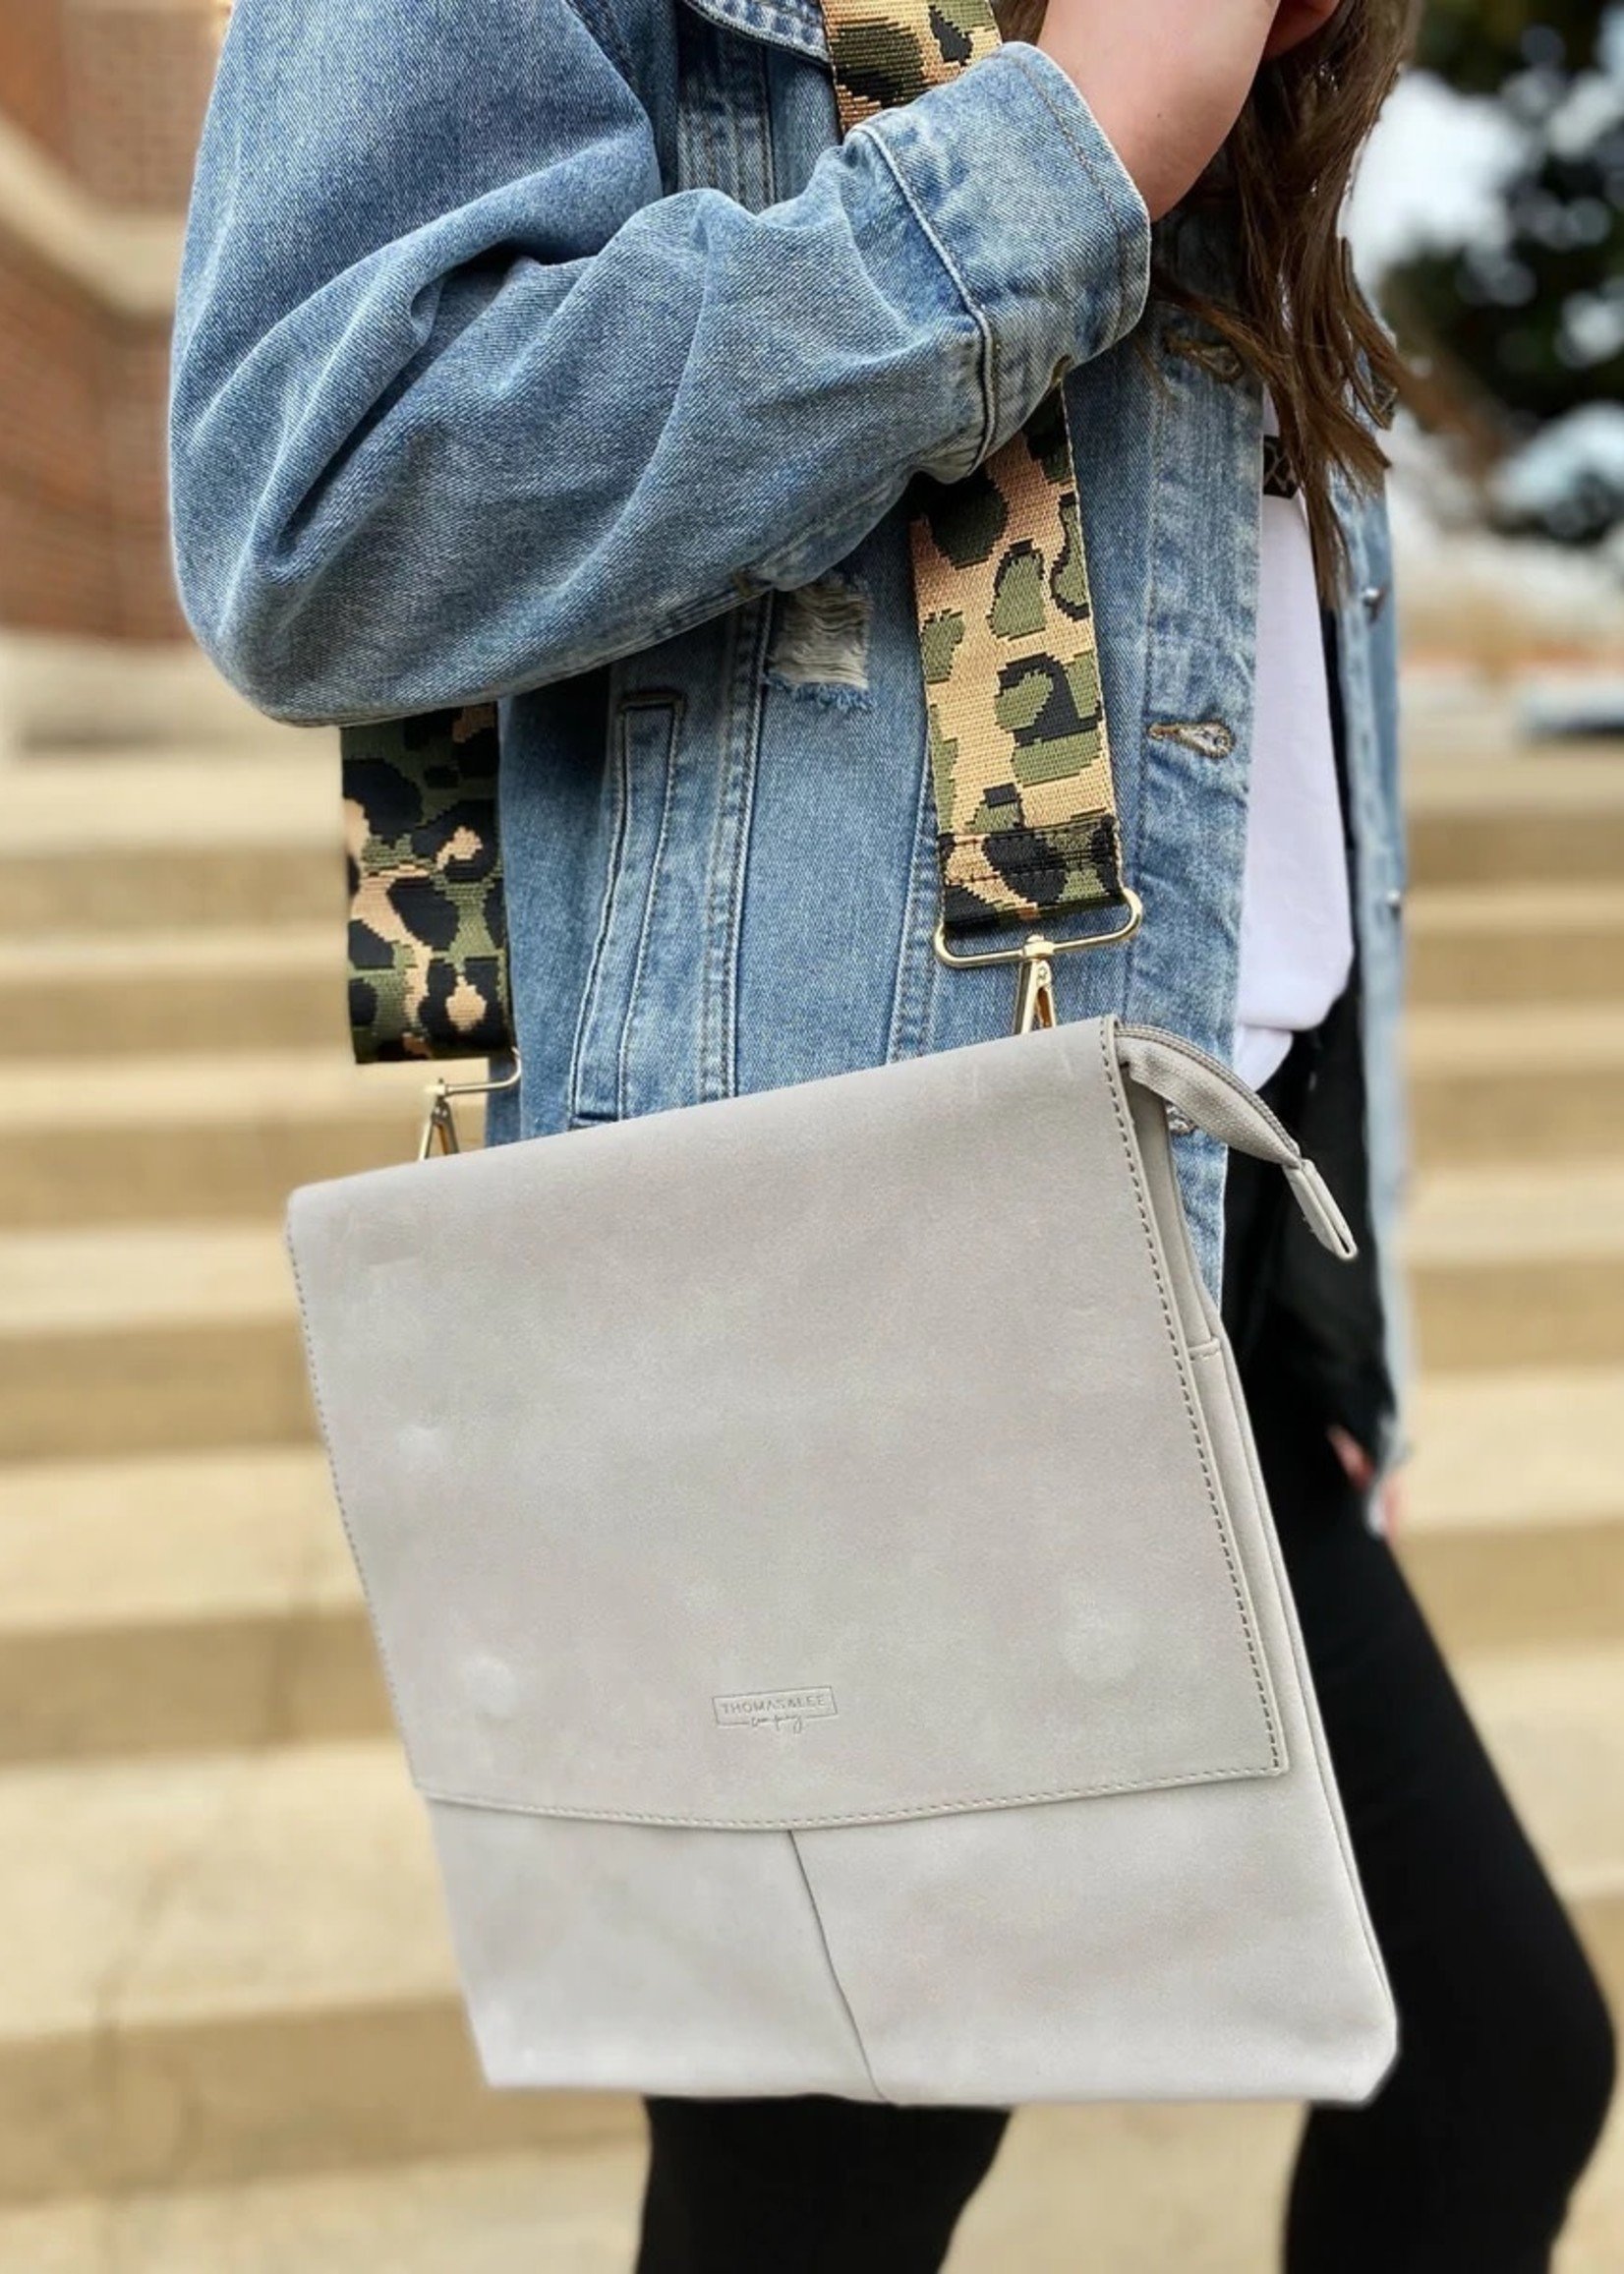 Bloom and Company Grey Suede Cross Body Bag